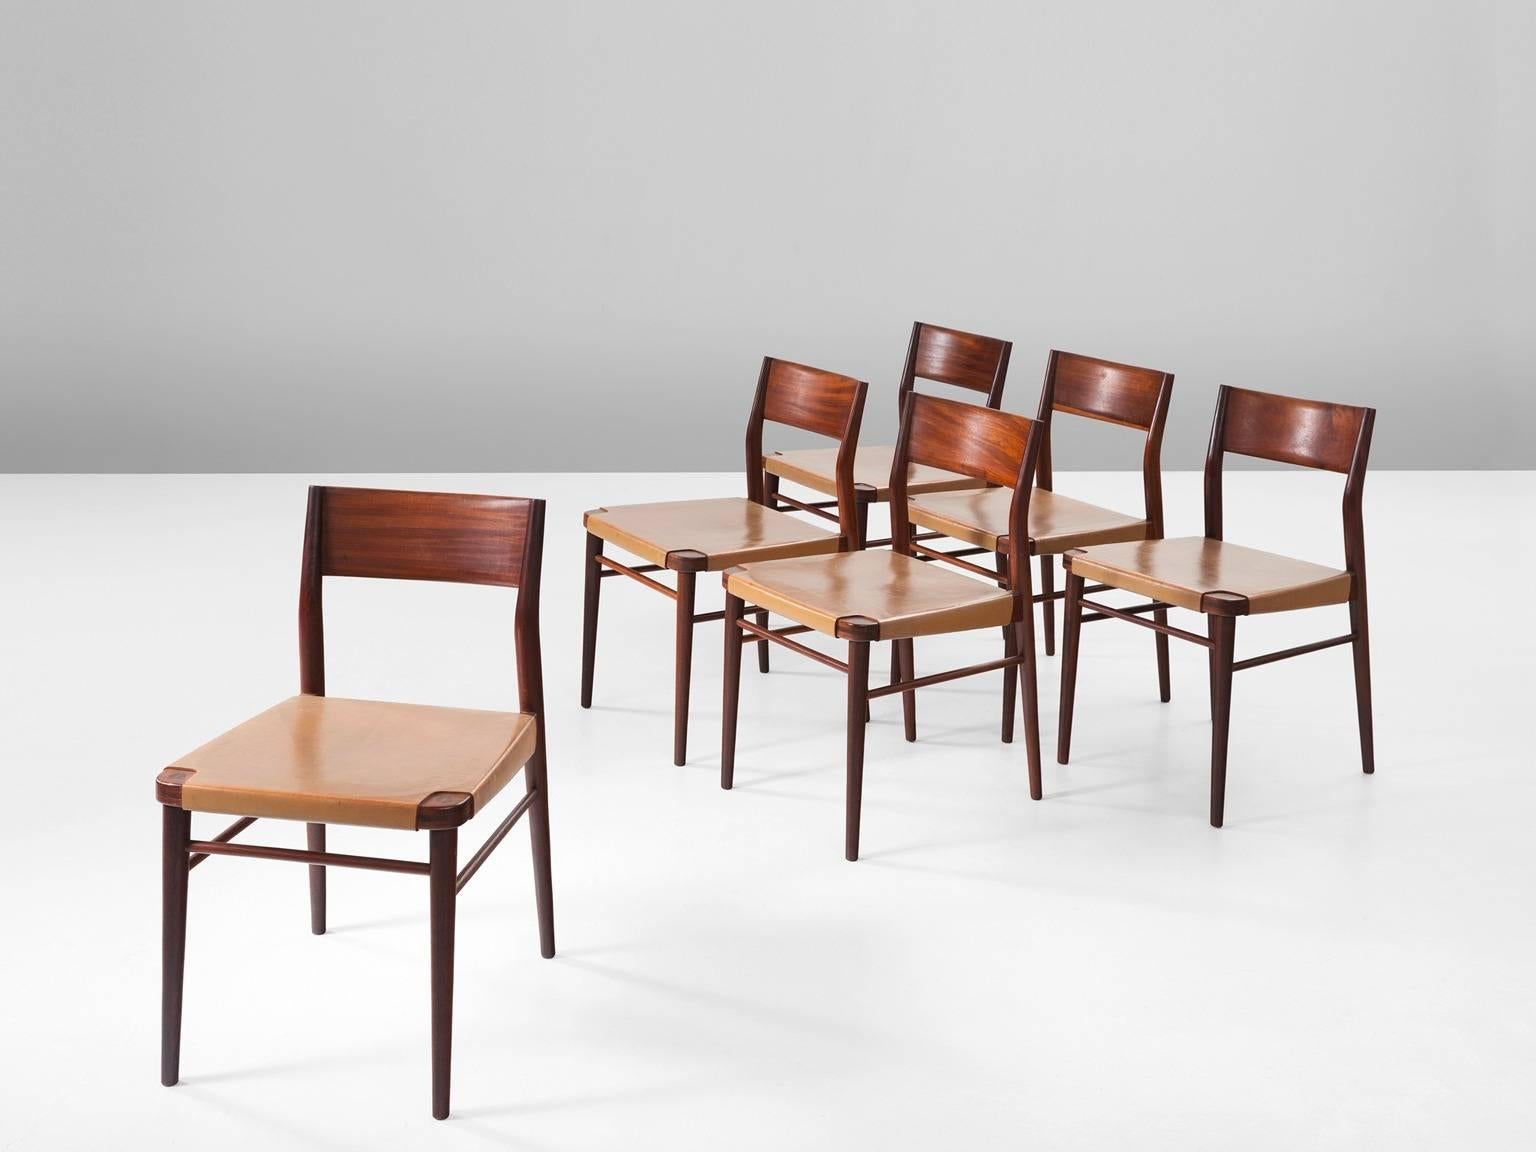 Set of six dining chairs, in leather and mahogany, Italy, 1950s.

Six dining room chairs with mahogany frame and cognac leather upholstery. These chairs are a great example of Italian Mid-Century design. They represent the open and fragile-looking